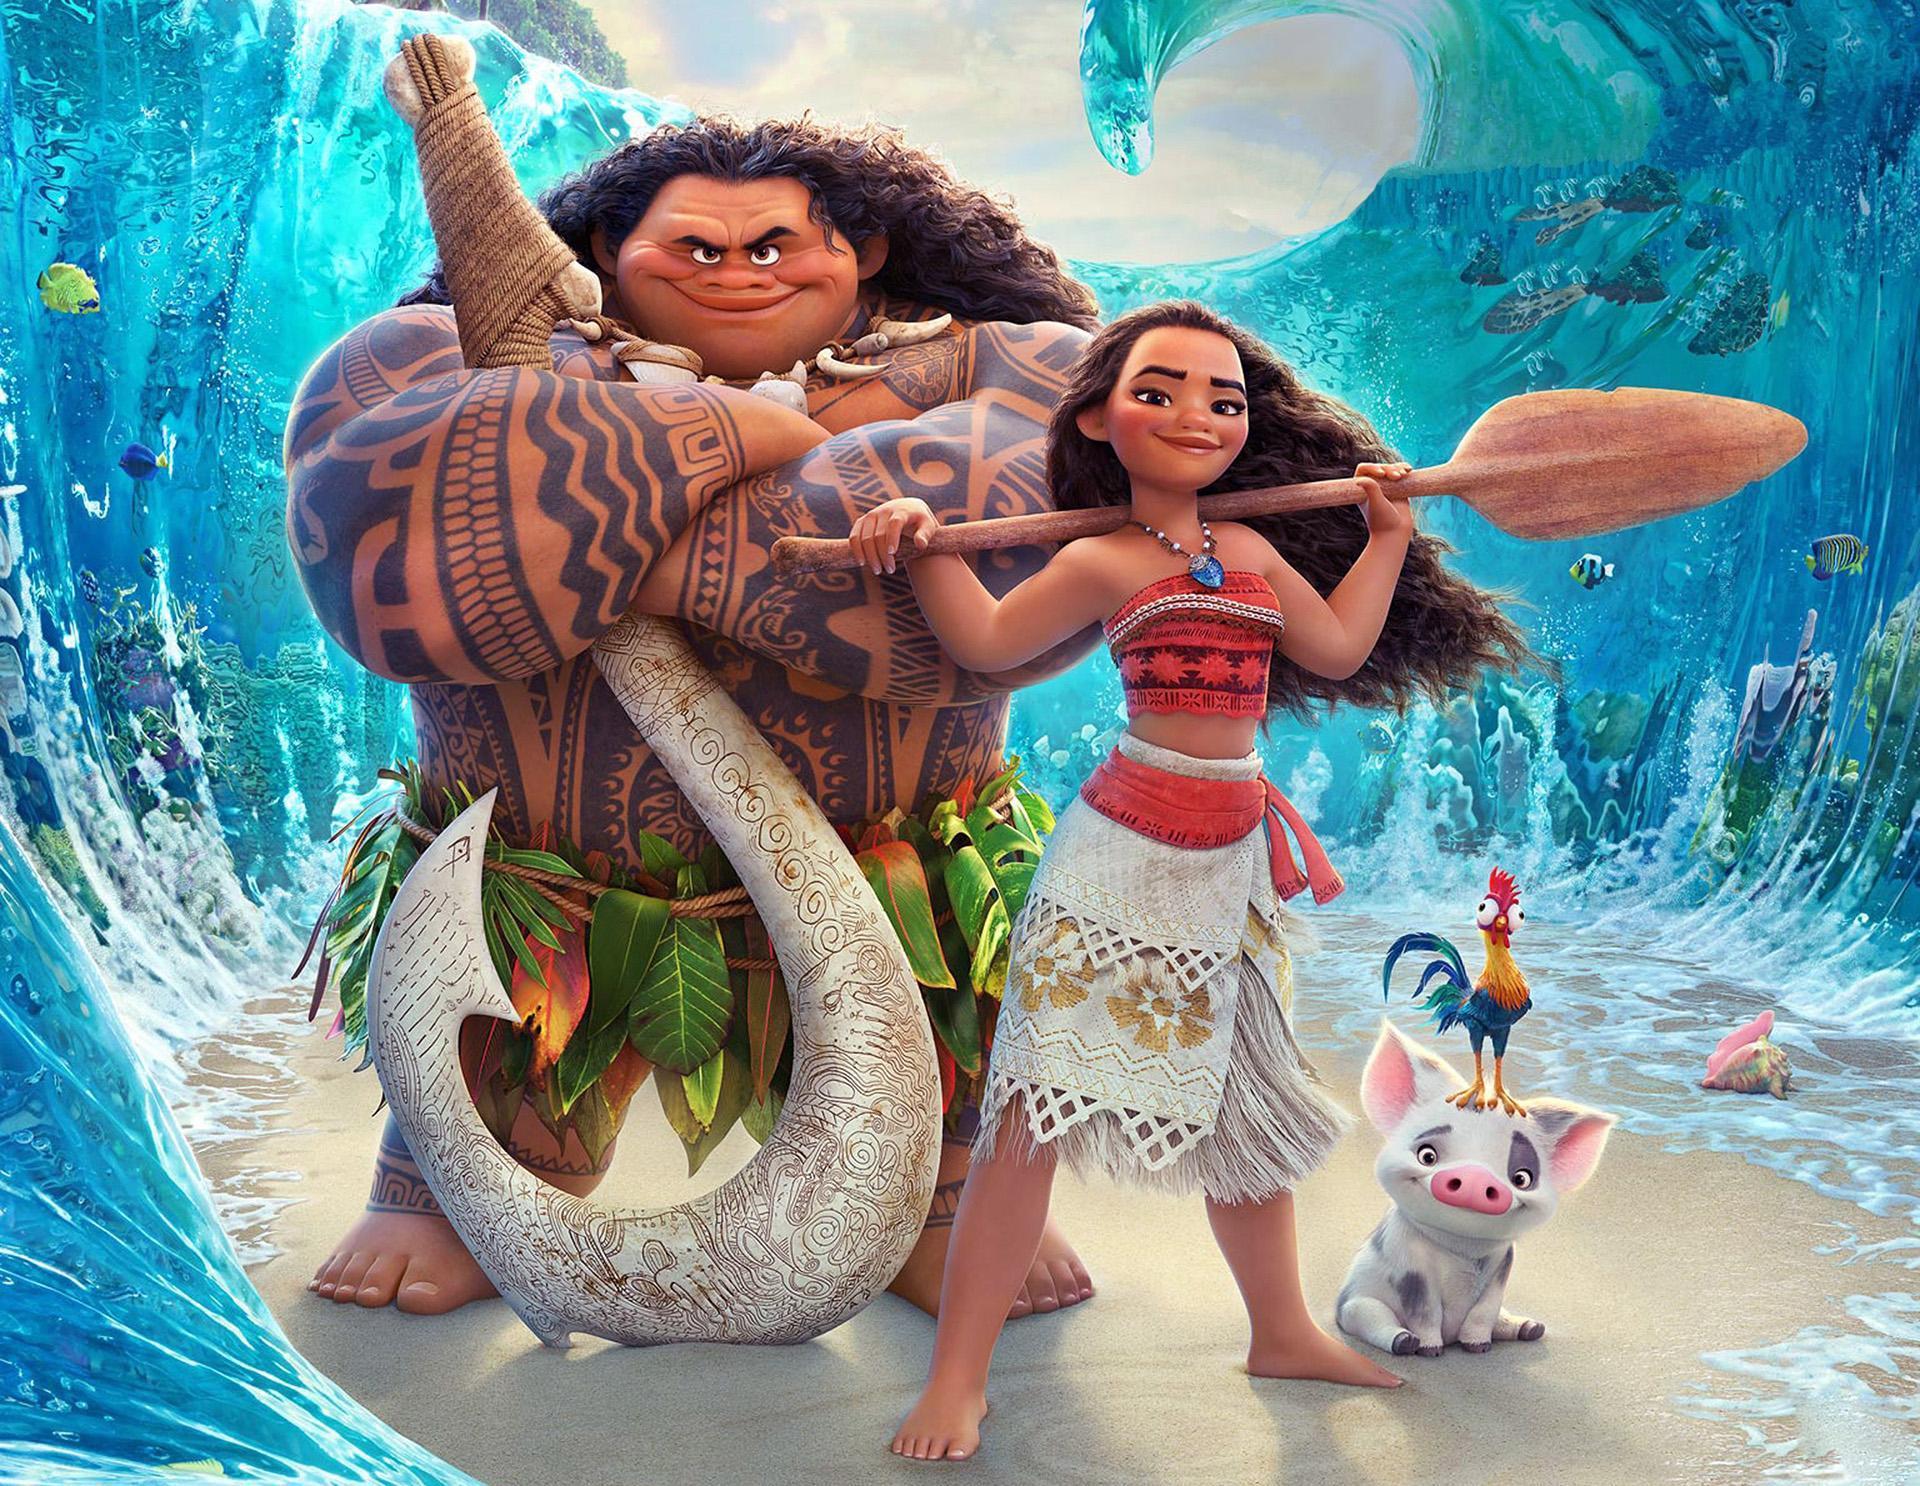 Moana Wallpapers (64+ pictures)